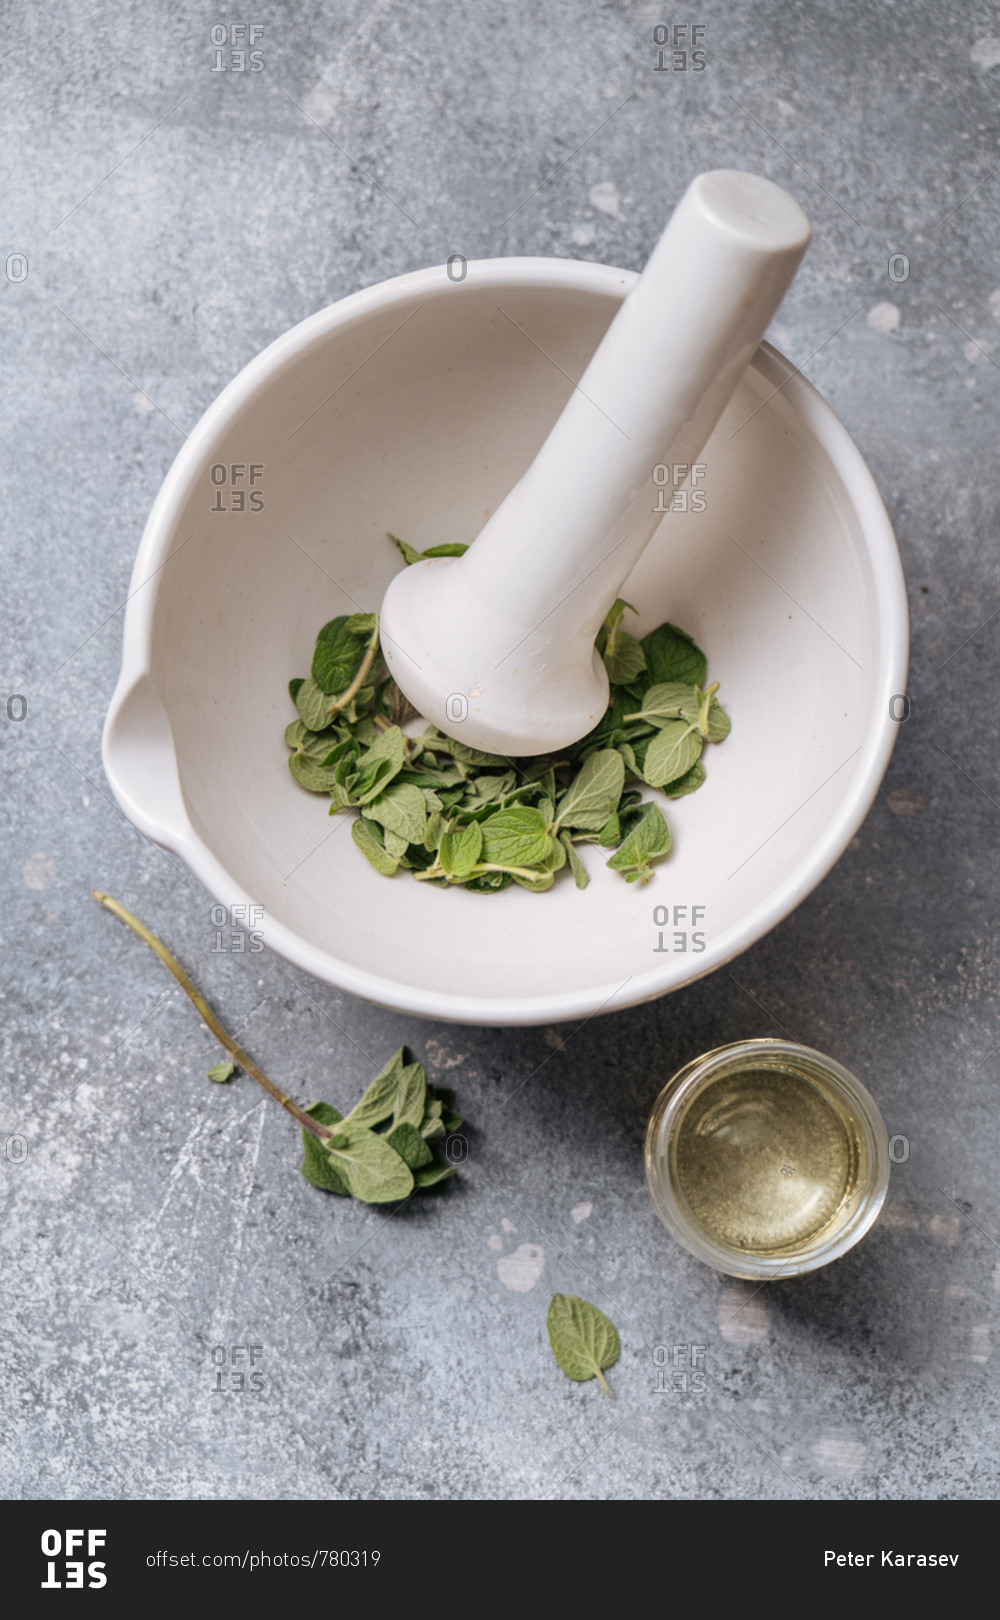 Herbs in a mortar with pestle and a small bowl of oil